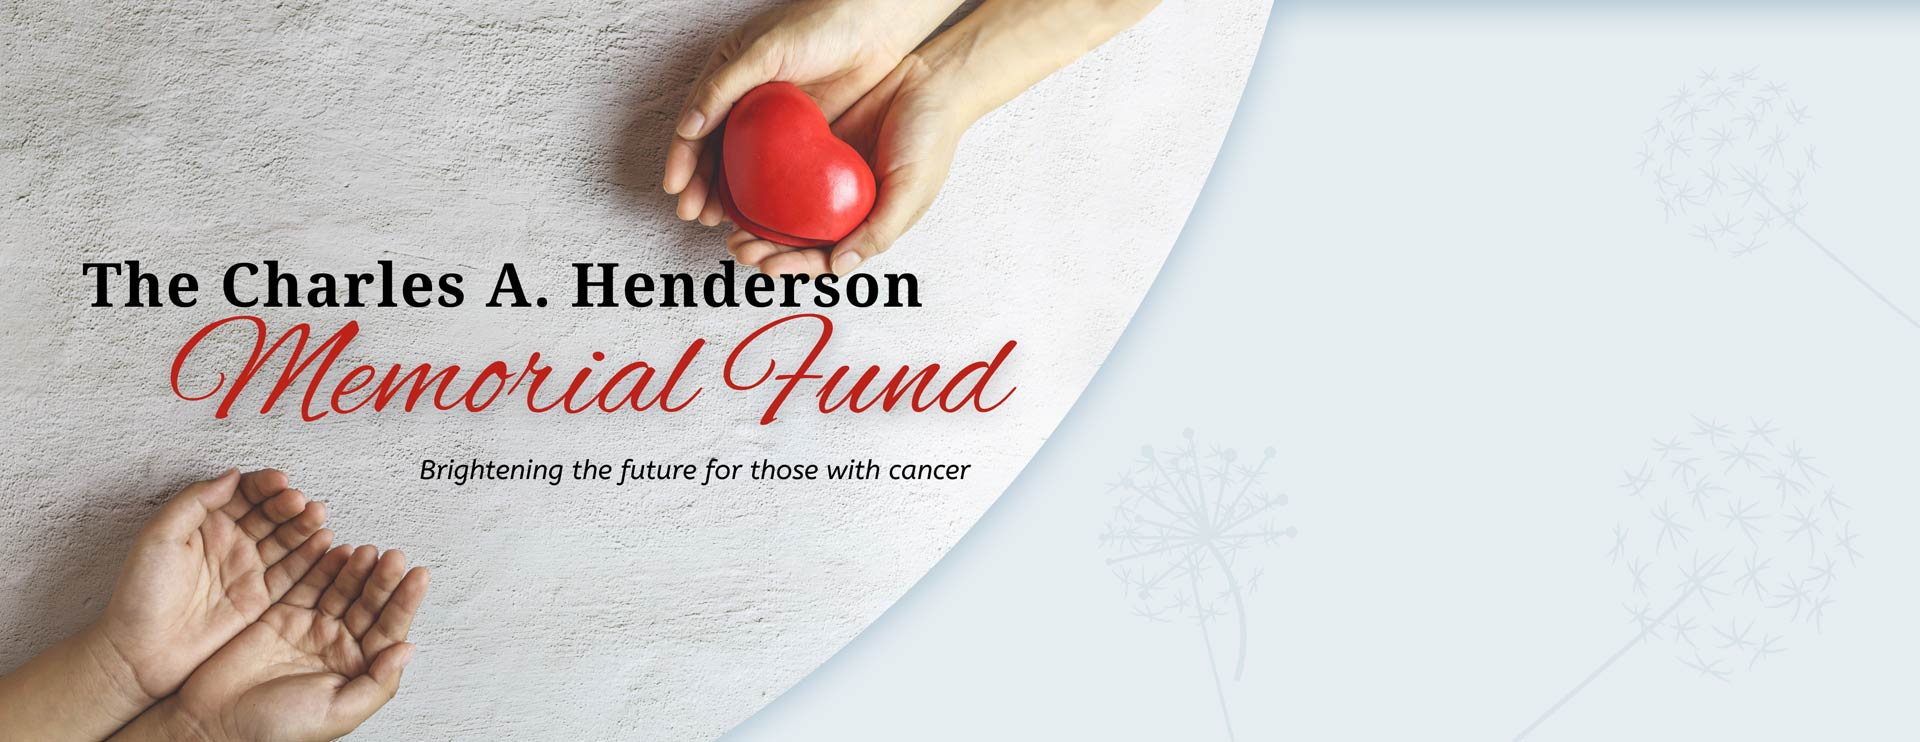 Charles A. Henderson Memorial Fund at Piedmont Cancer Institute | Atlanta Oncologists